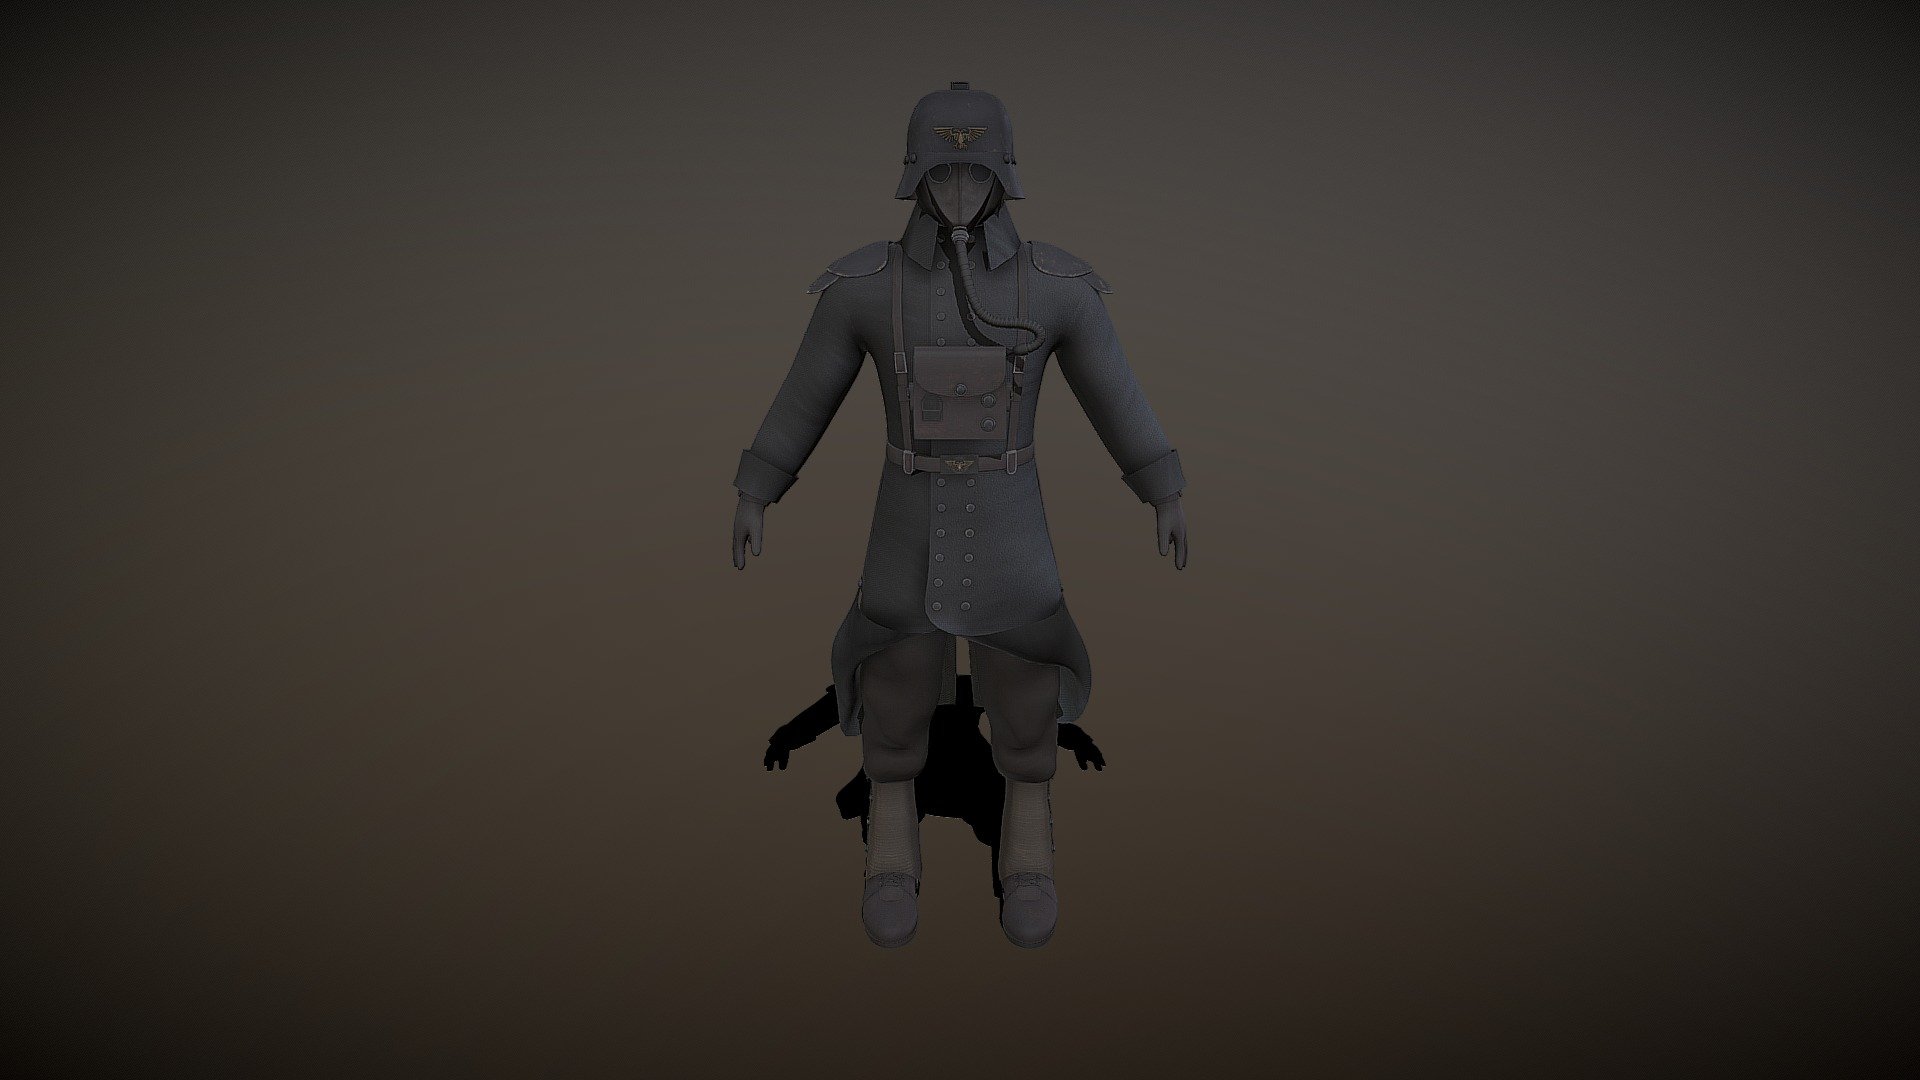 My first character is Warhammer 40k soldier of the Death Corps Krieg
The model was made by Blender texture Substance painter
Texture maps(base color) - Death Corps Krieg Soldiers - 3D model by Septim (@SeptimDev) 3d model